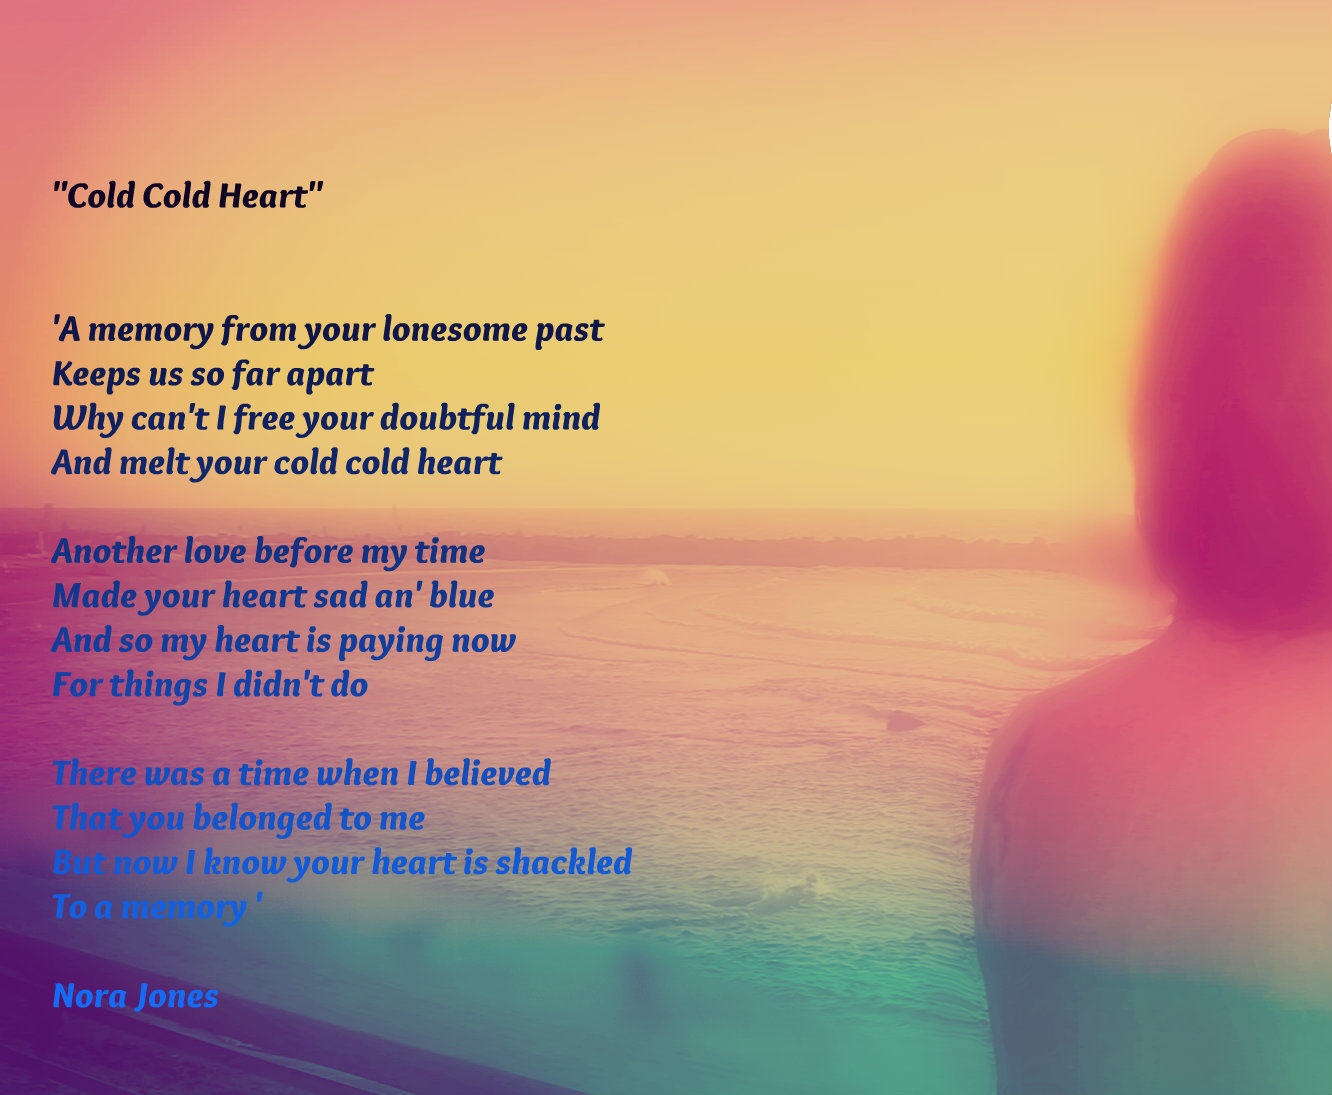 Cold cold heart текст. Cold Cold Heart перевод. Cold Heart текст. My Heart is Cold текст. Coldest in my Heart фото.